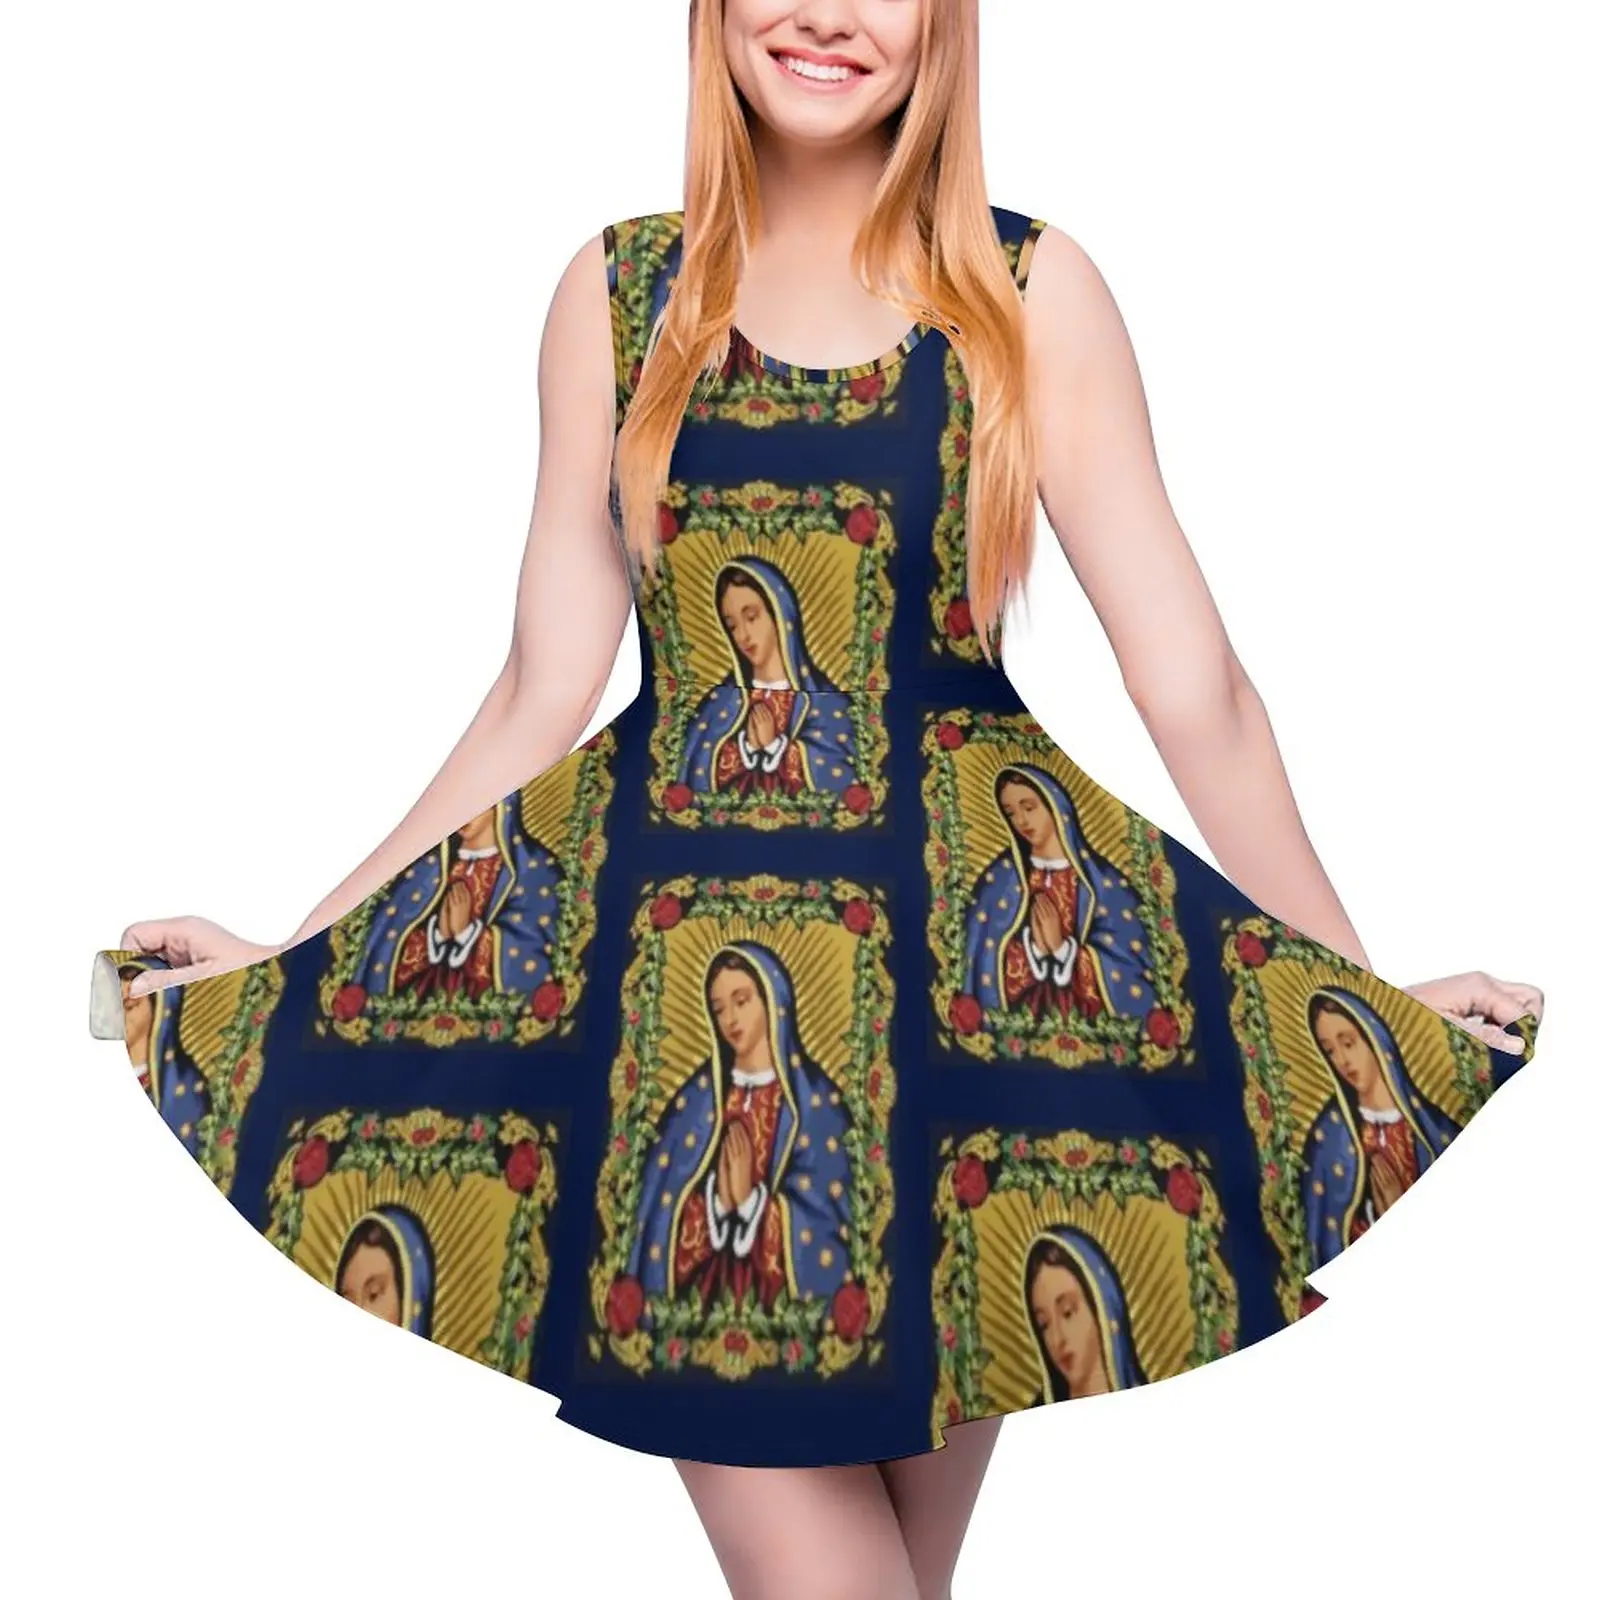 

Our Lady of Guadalupe Dress Virgin Mary Kawaii Dresses High Waist Korean Fashion Skate Dress Female Graphic Clothes Gift Idea